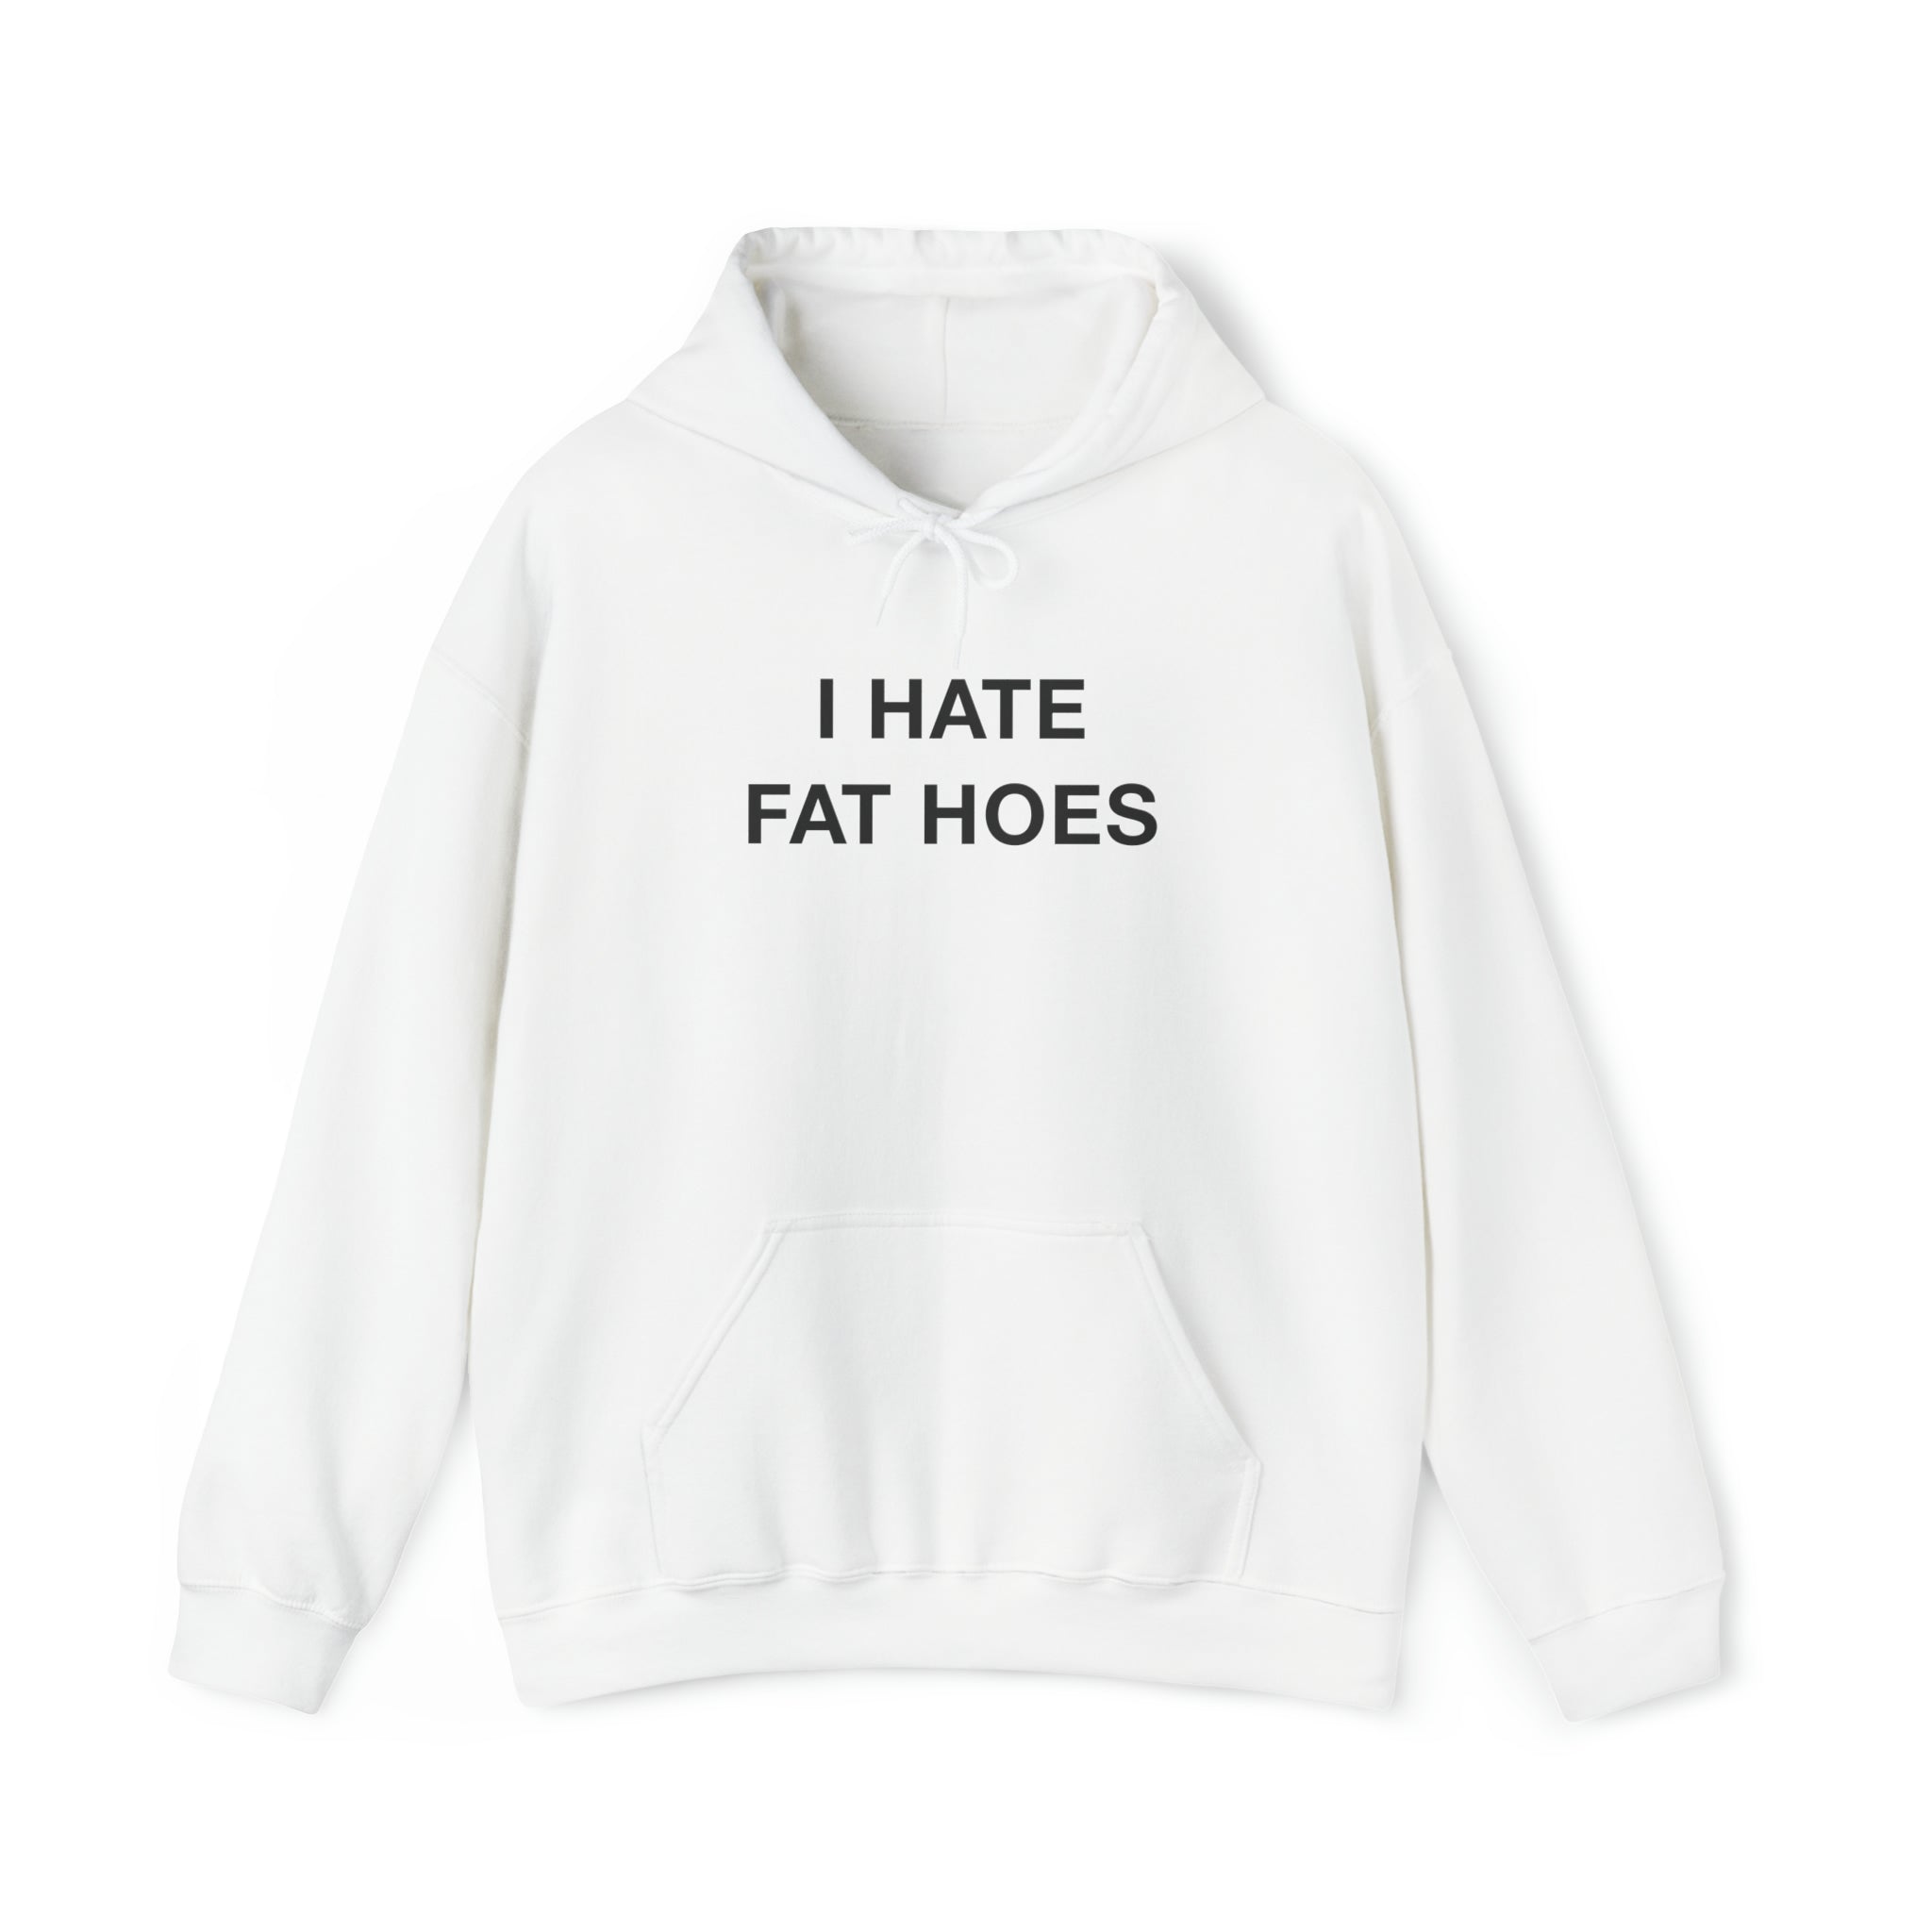 "I Hate Fat Hoes" Hoodie